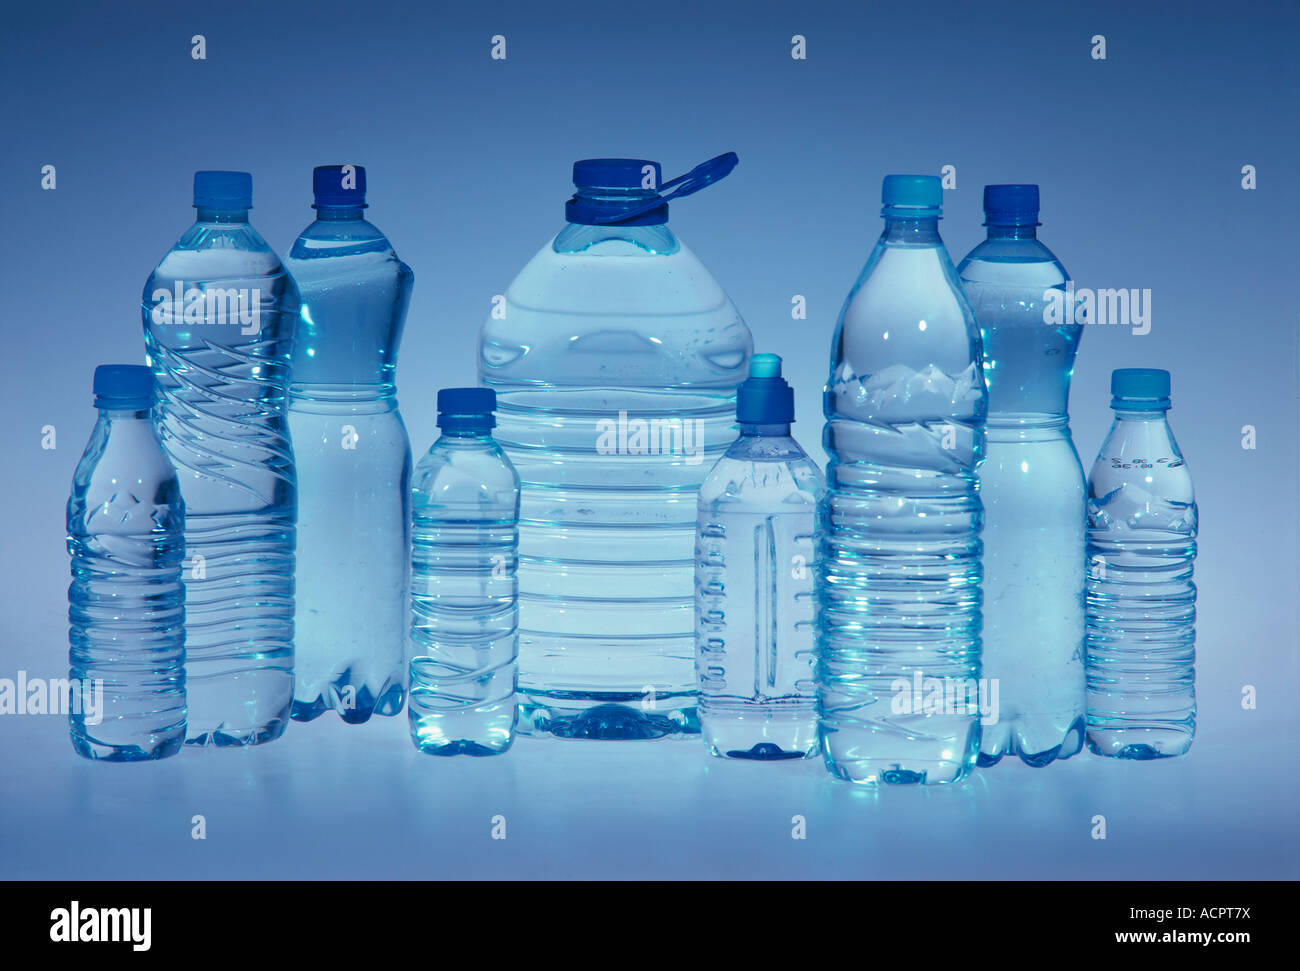 https://c8.alamy.com/comp/ACPT7X/9-plastic-bottles-of-water-with-different-size-grey-background-ACPT7X.jpg